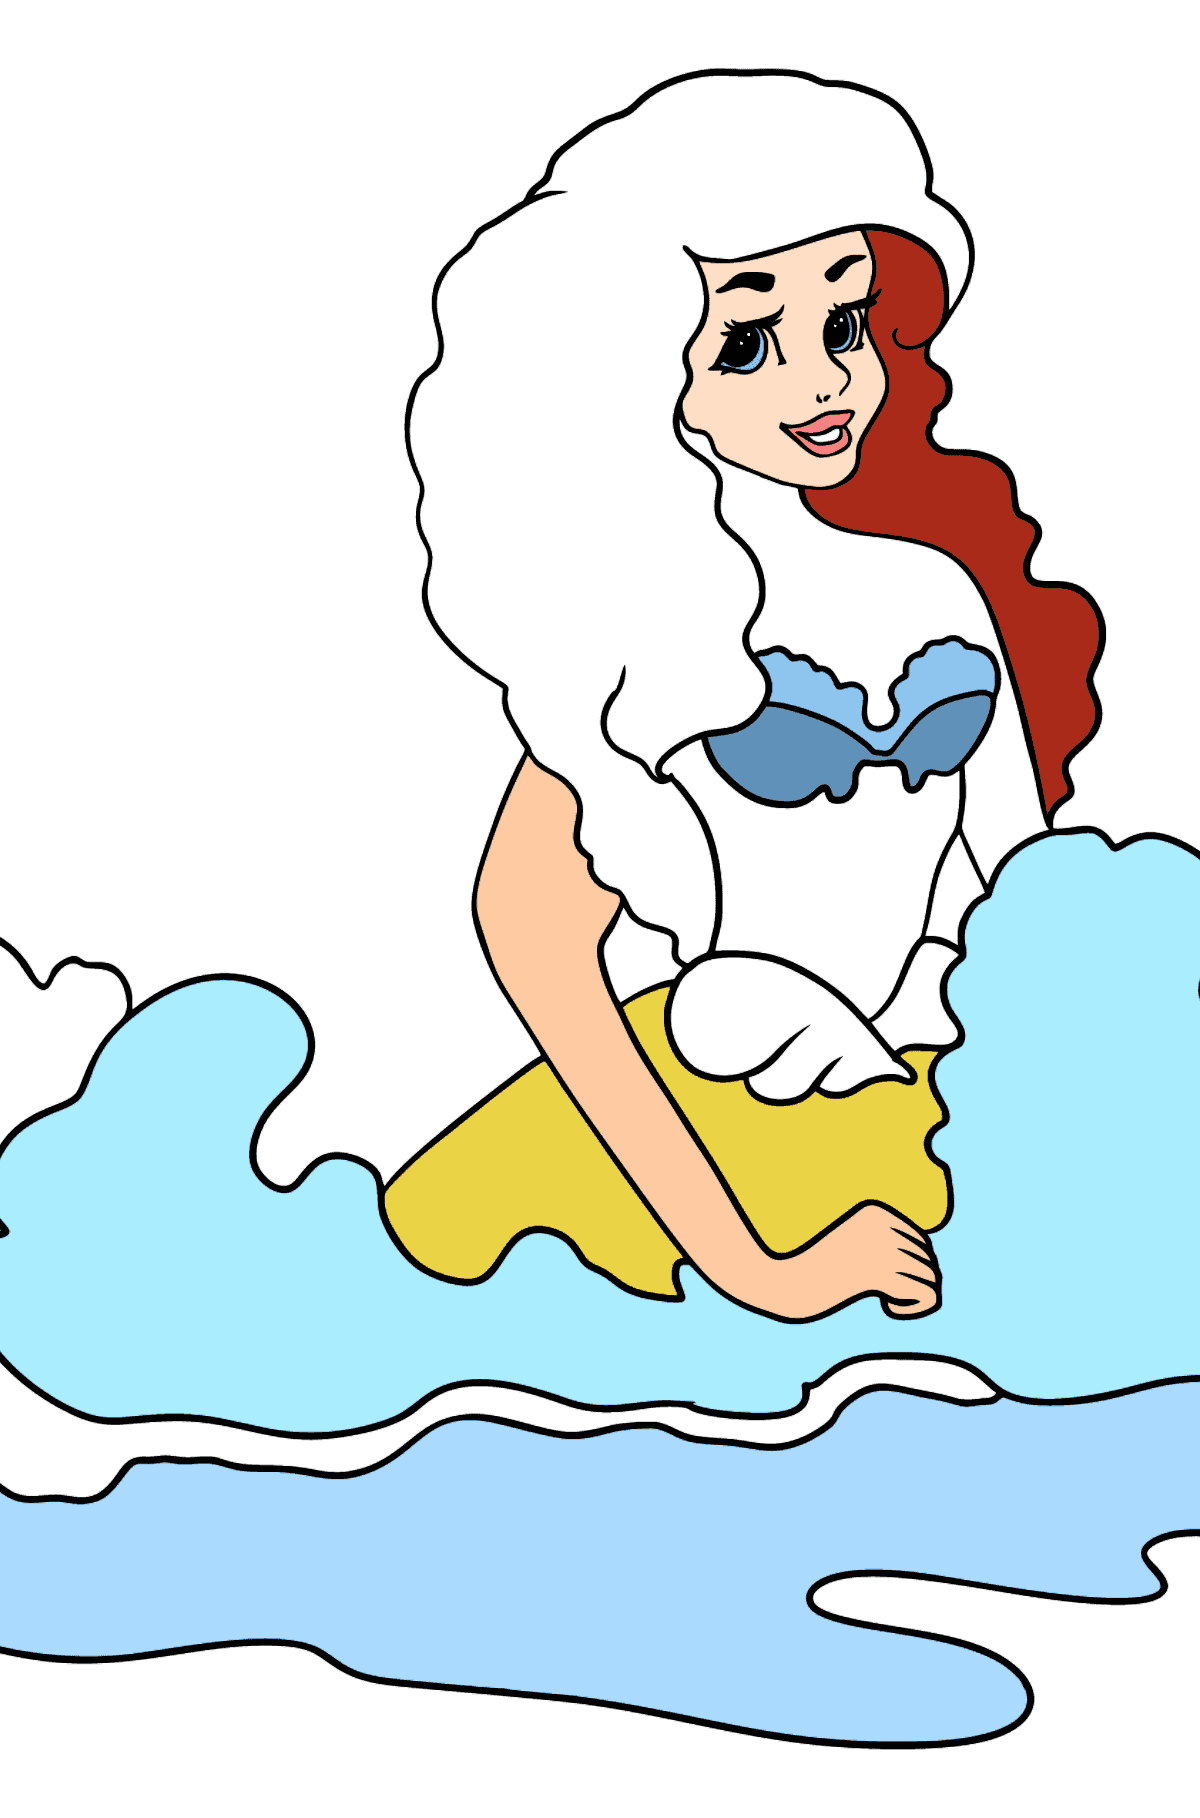 Coloring Page Mermaid on the waves - Coloring Pages for Kids